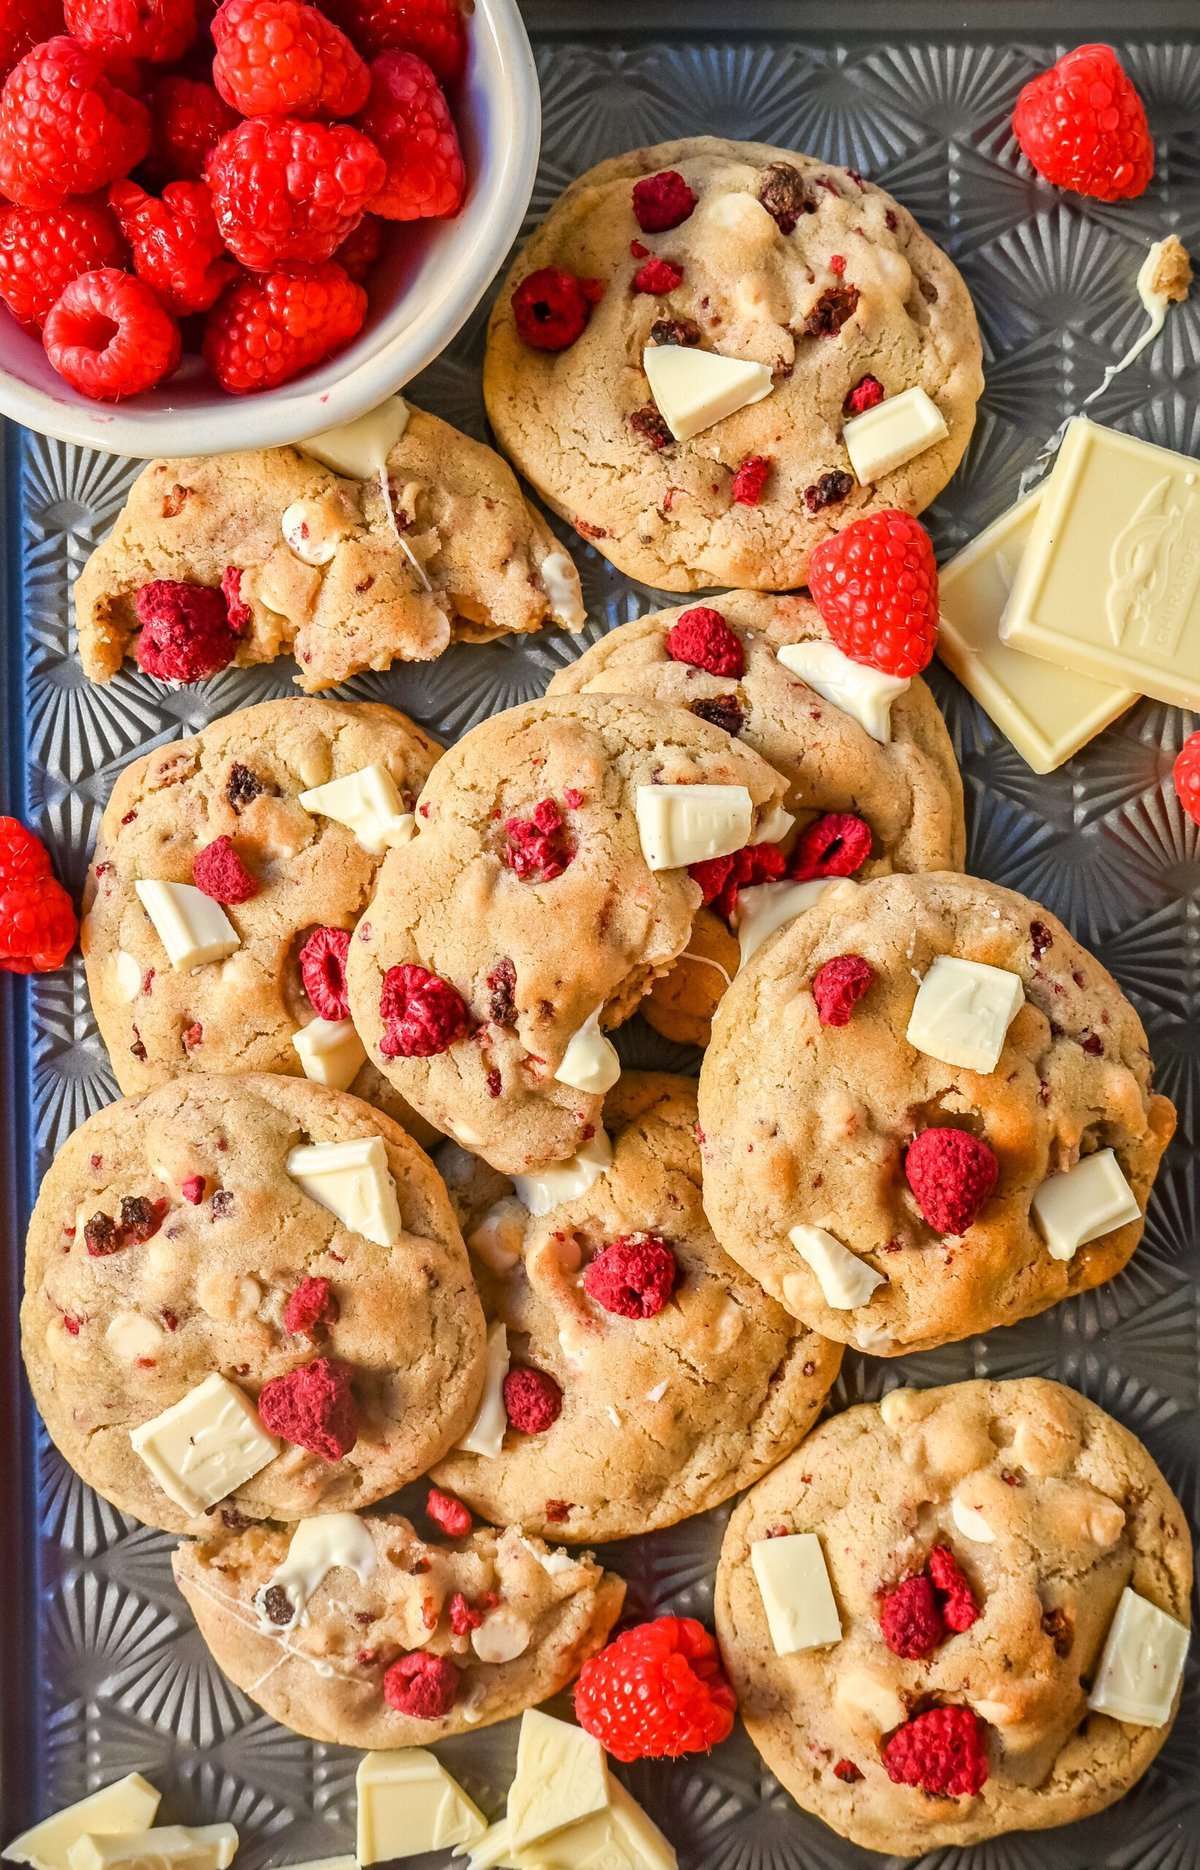 White Chocolate Raspberry Cookies. Soft and chewy raspberry white chocolate cookies made with freeze dried raspberries and creamy white chocolate. These are the best bakery-style white chocolate raspberry cookies!